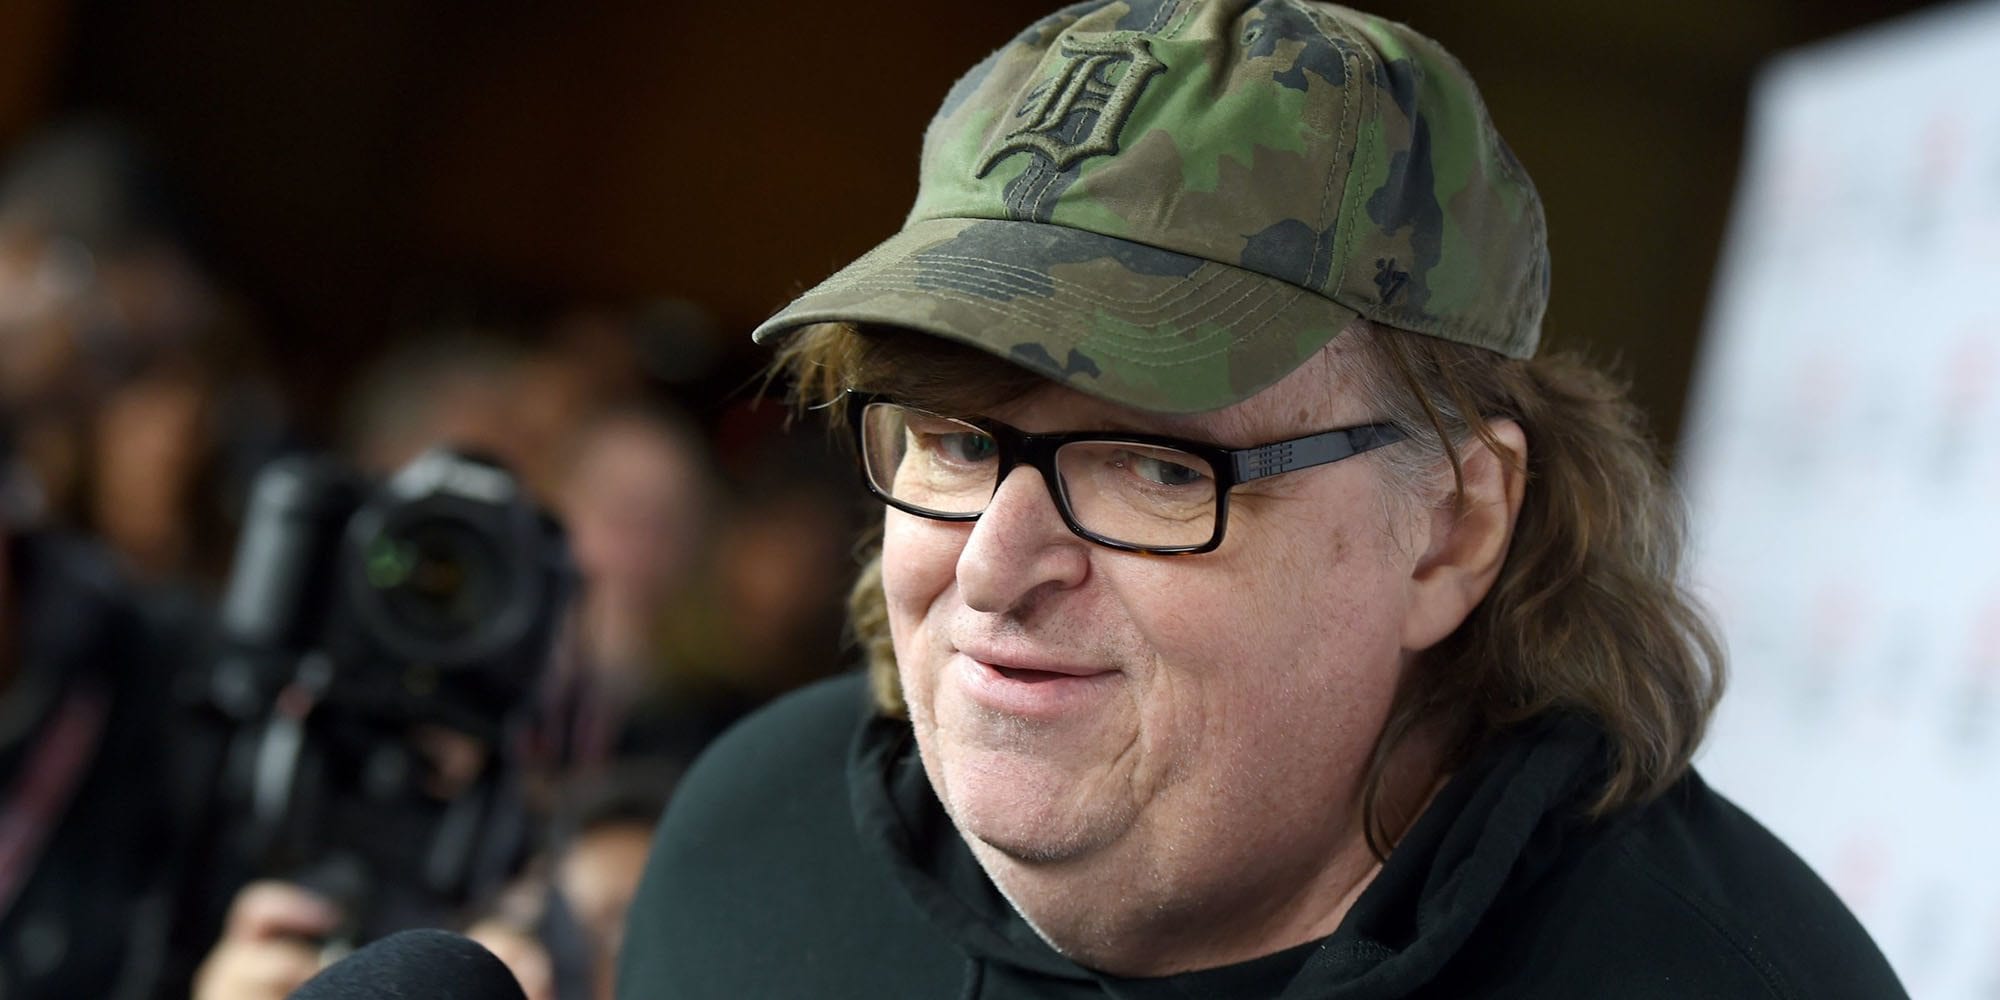 Michael Moore fights capitalism: The acclaimed documentary filmmaker has spoken out on the closure of New York’s Lincoln Plaza Cinema. It turns out that “capitalism killed this cinema”.